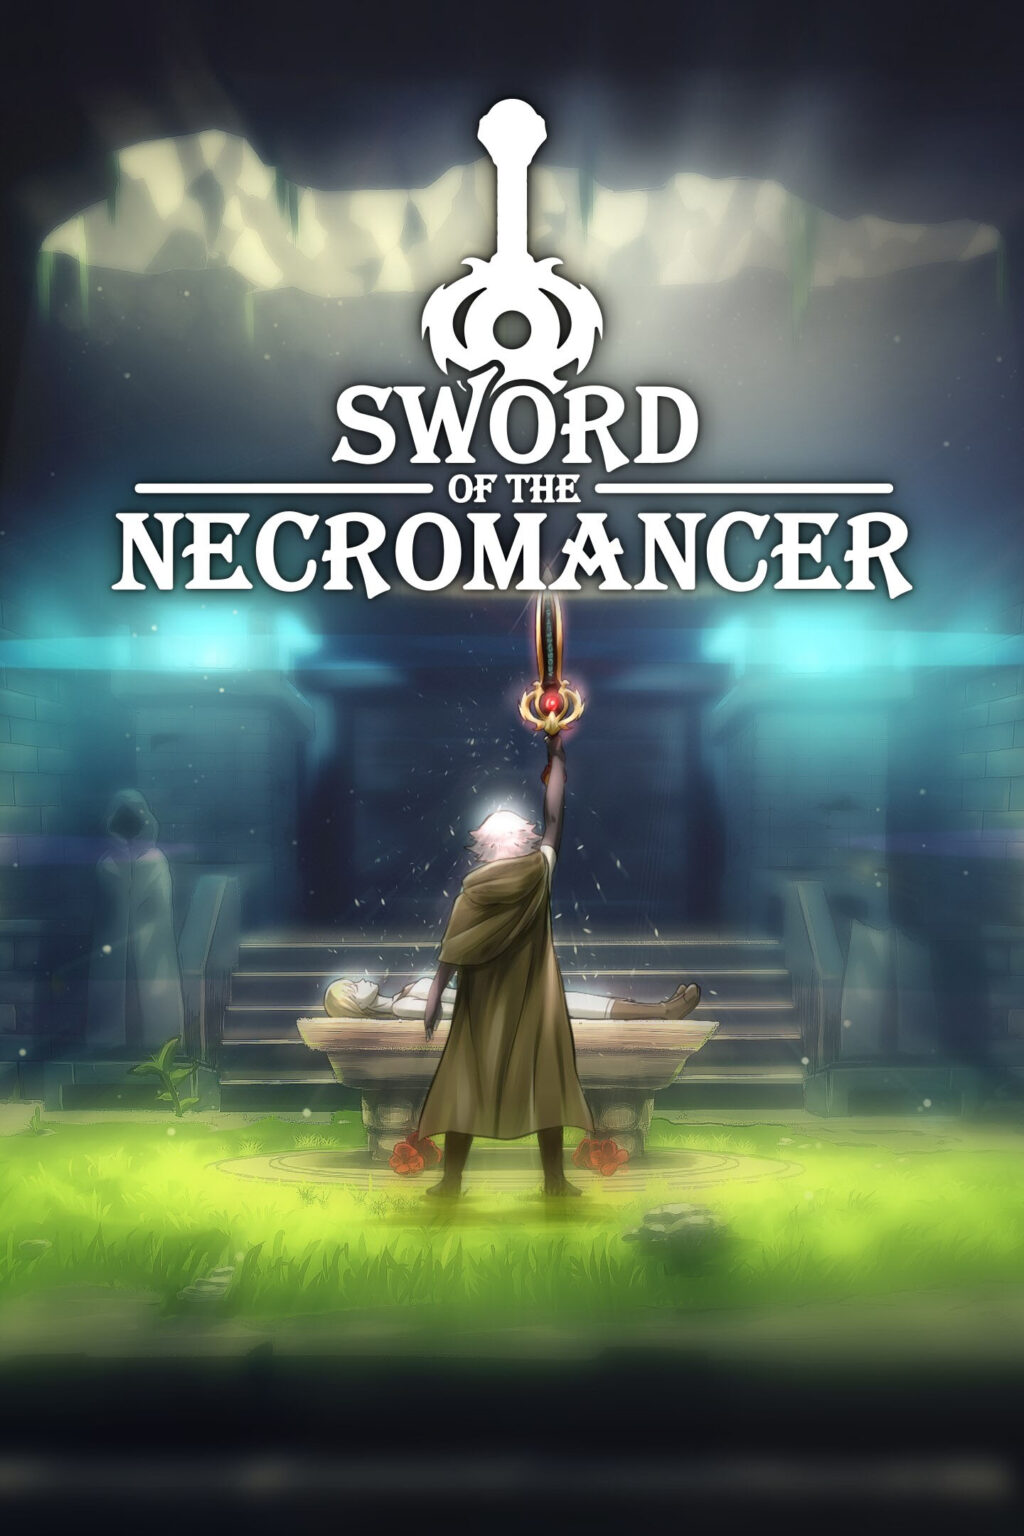 Sword of the Necromancer download the last version for ipod